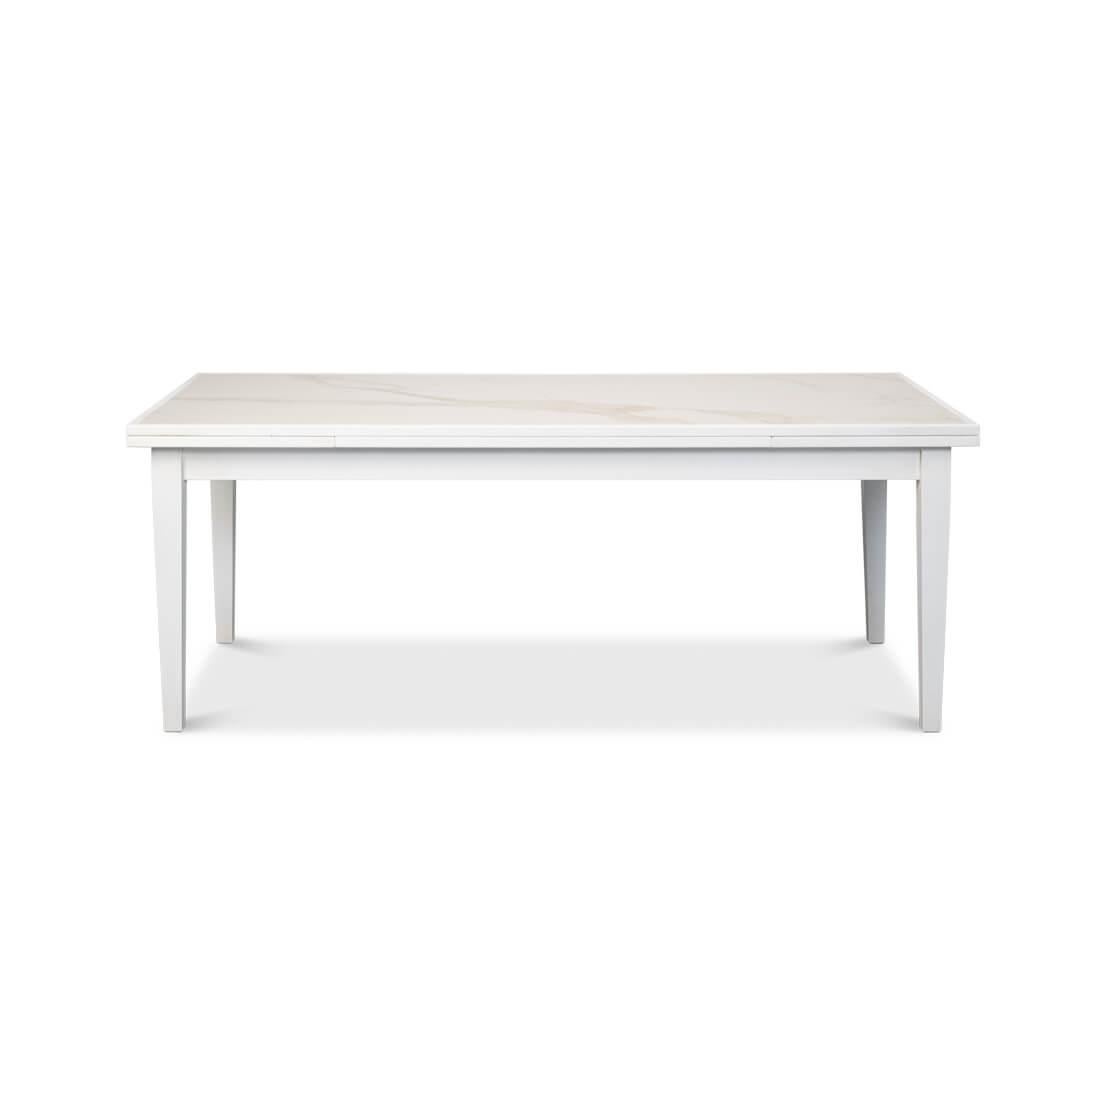 The Italian-style draw-leaf table extends from an 81